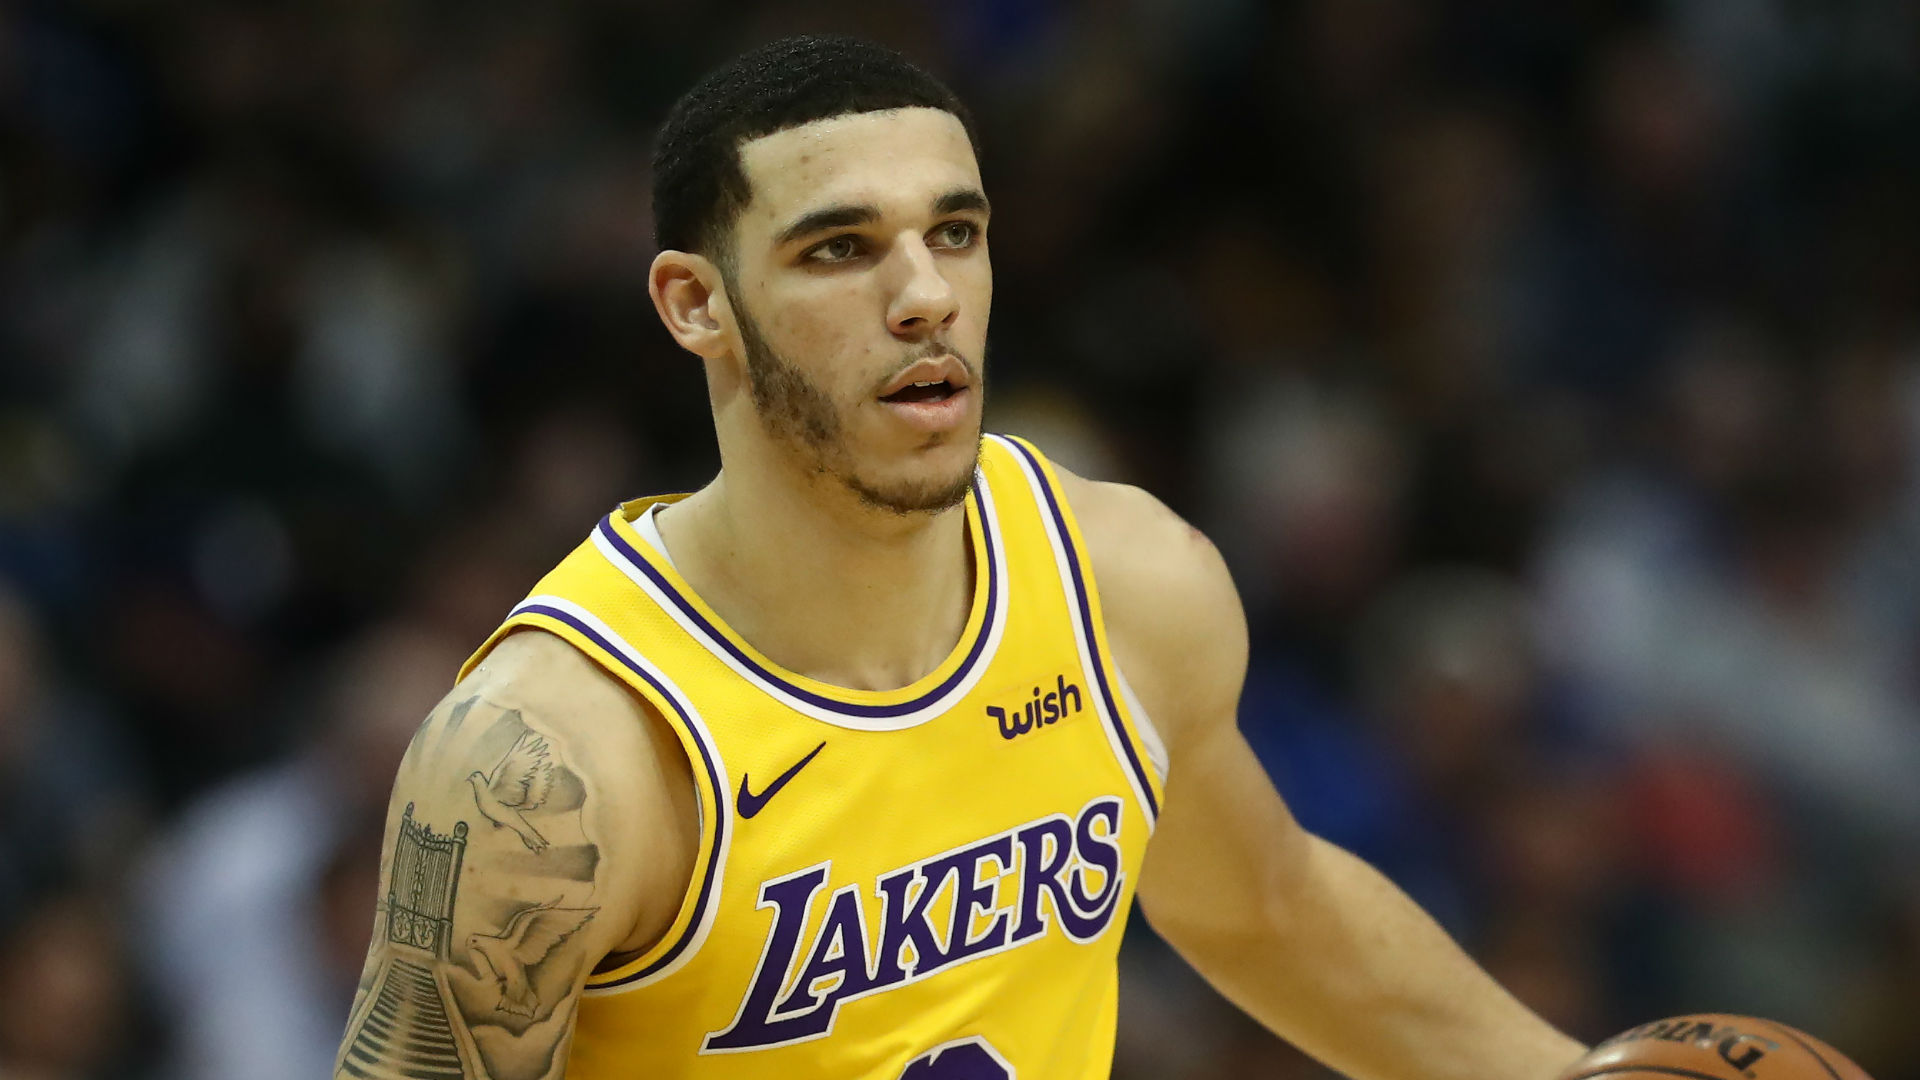 The foul call on Lonzo Ball at the end of regulation should not have resulted in three free throws, an NBA referee has admitted.